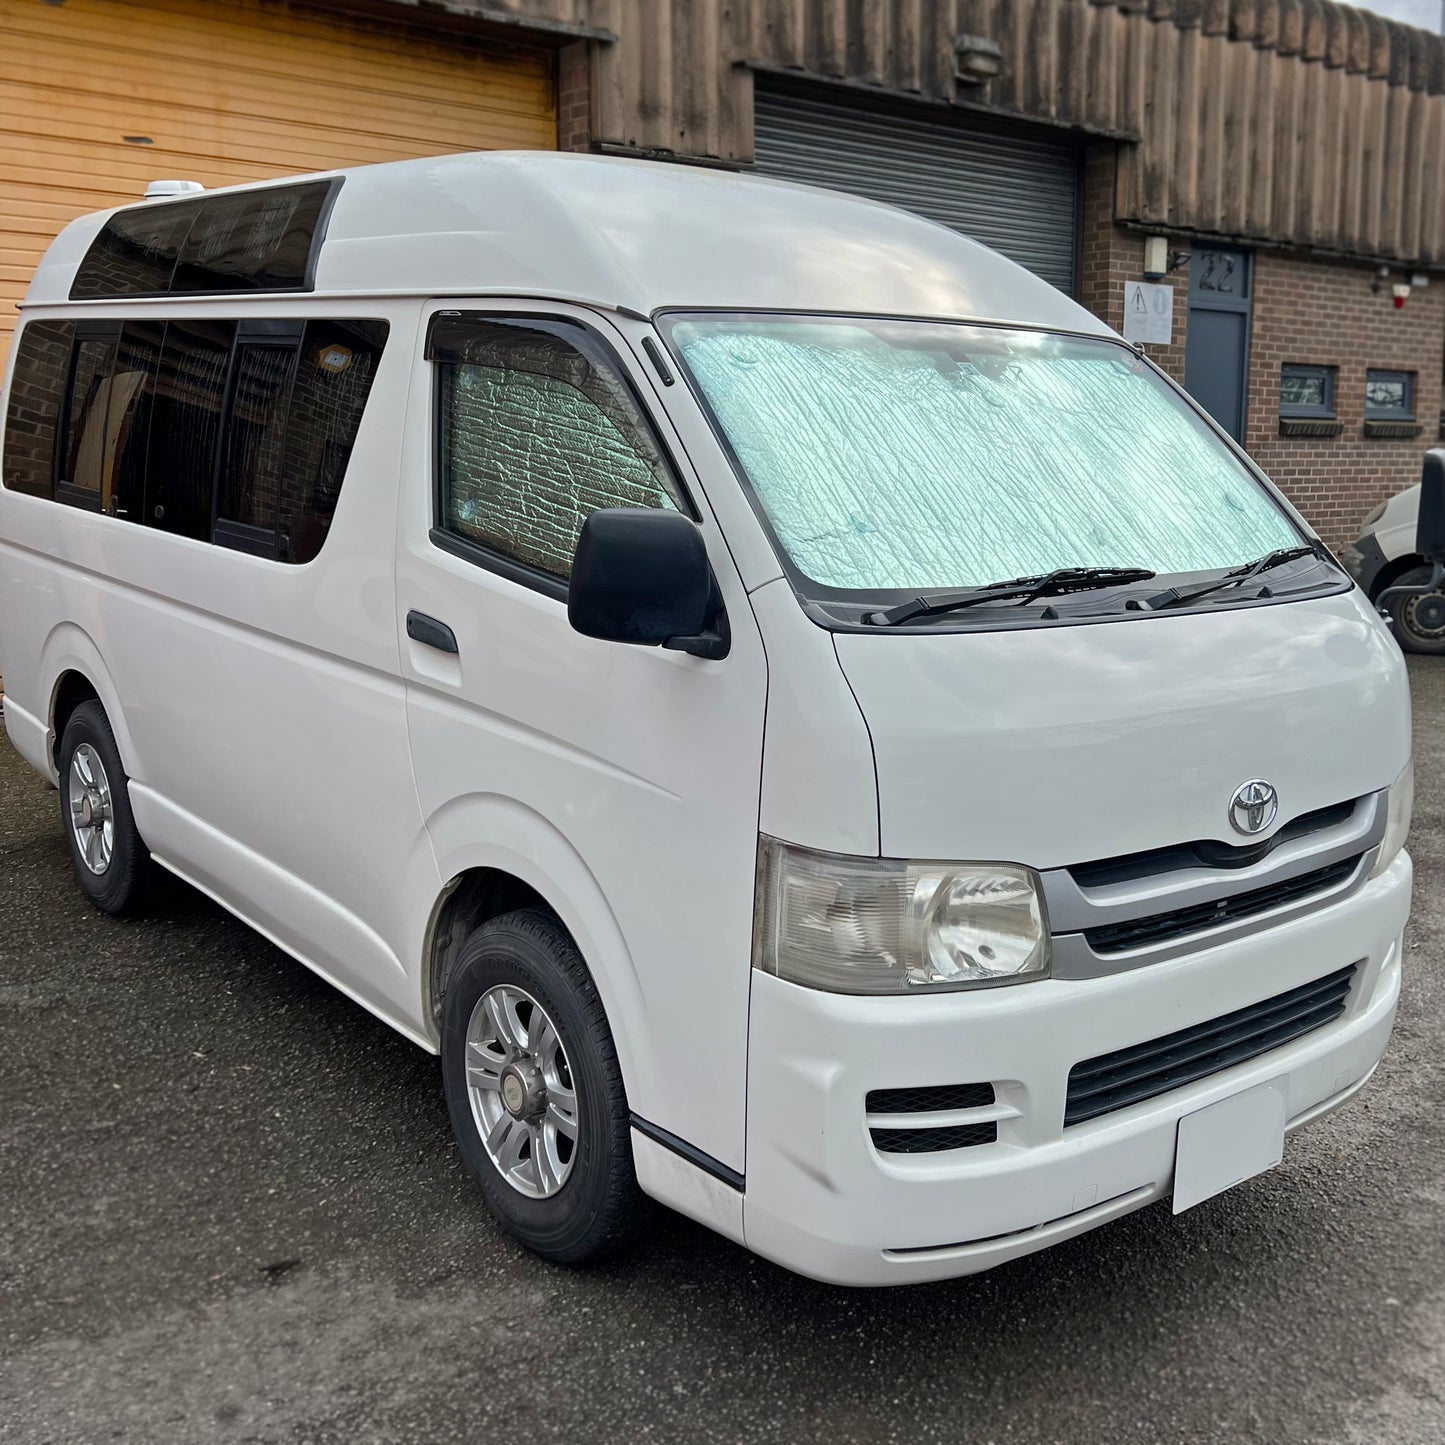 Toyota HiAce (Japanese Import) - Thermal Screens